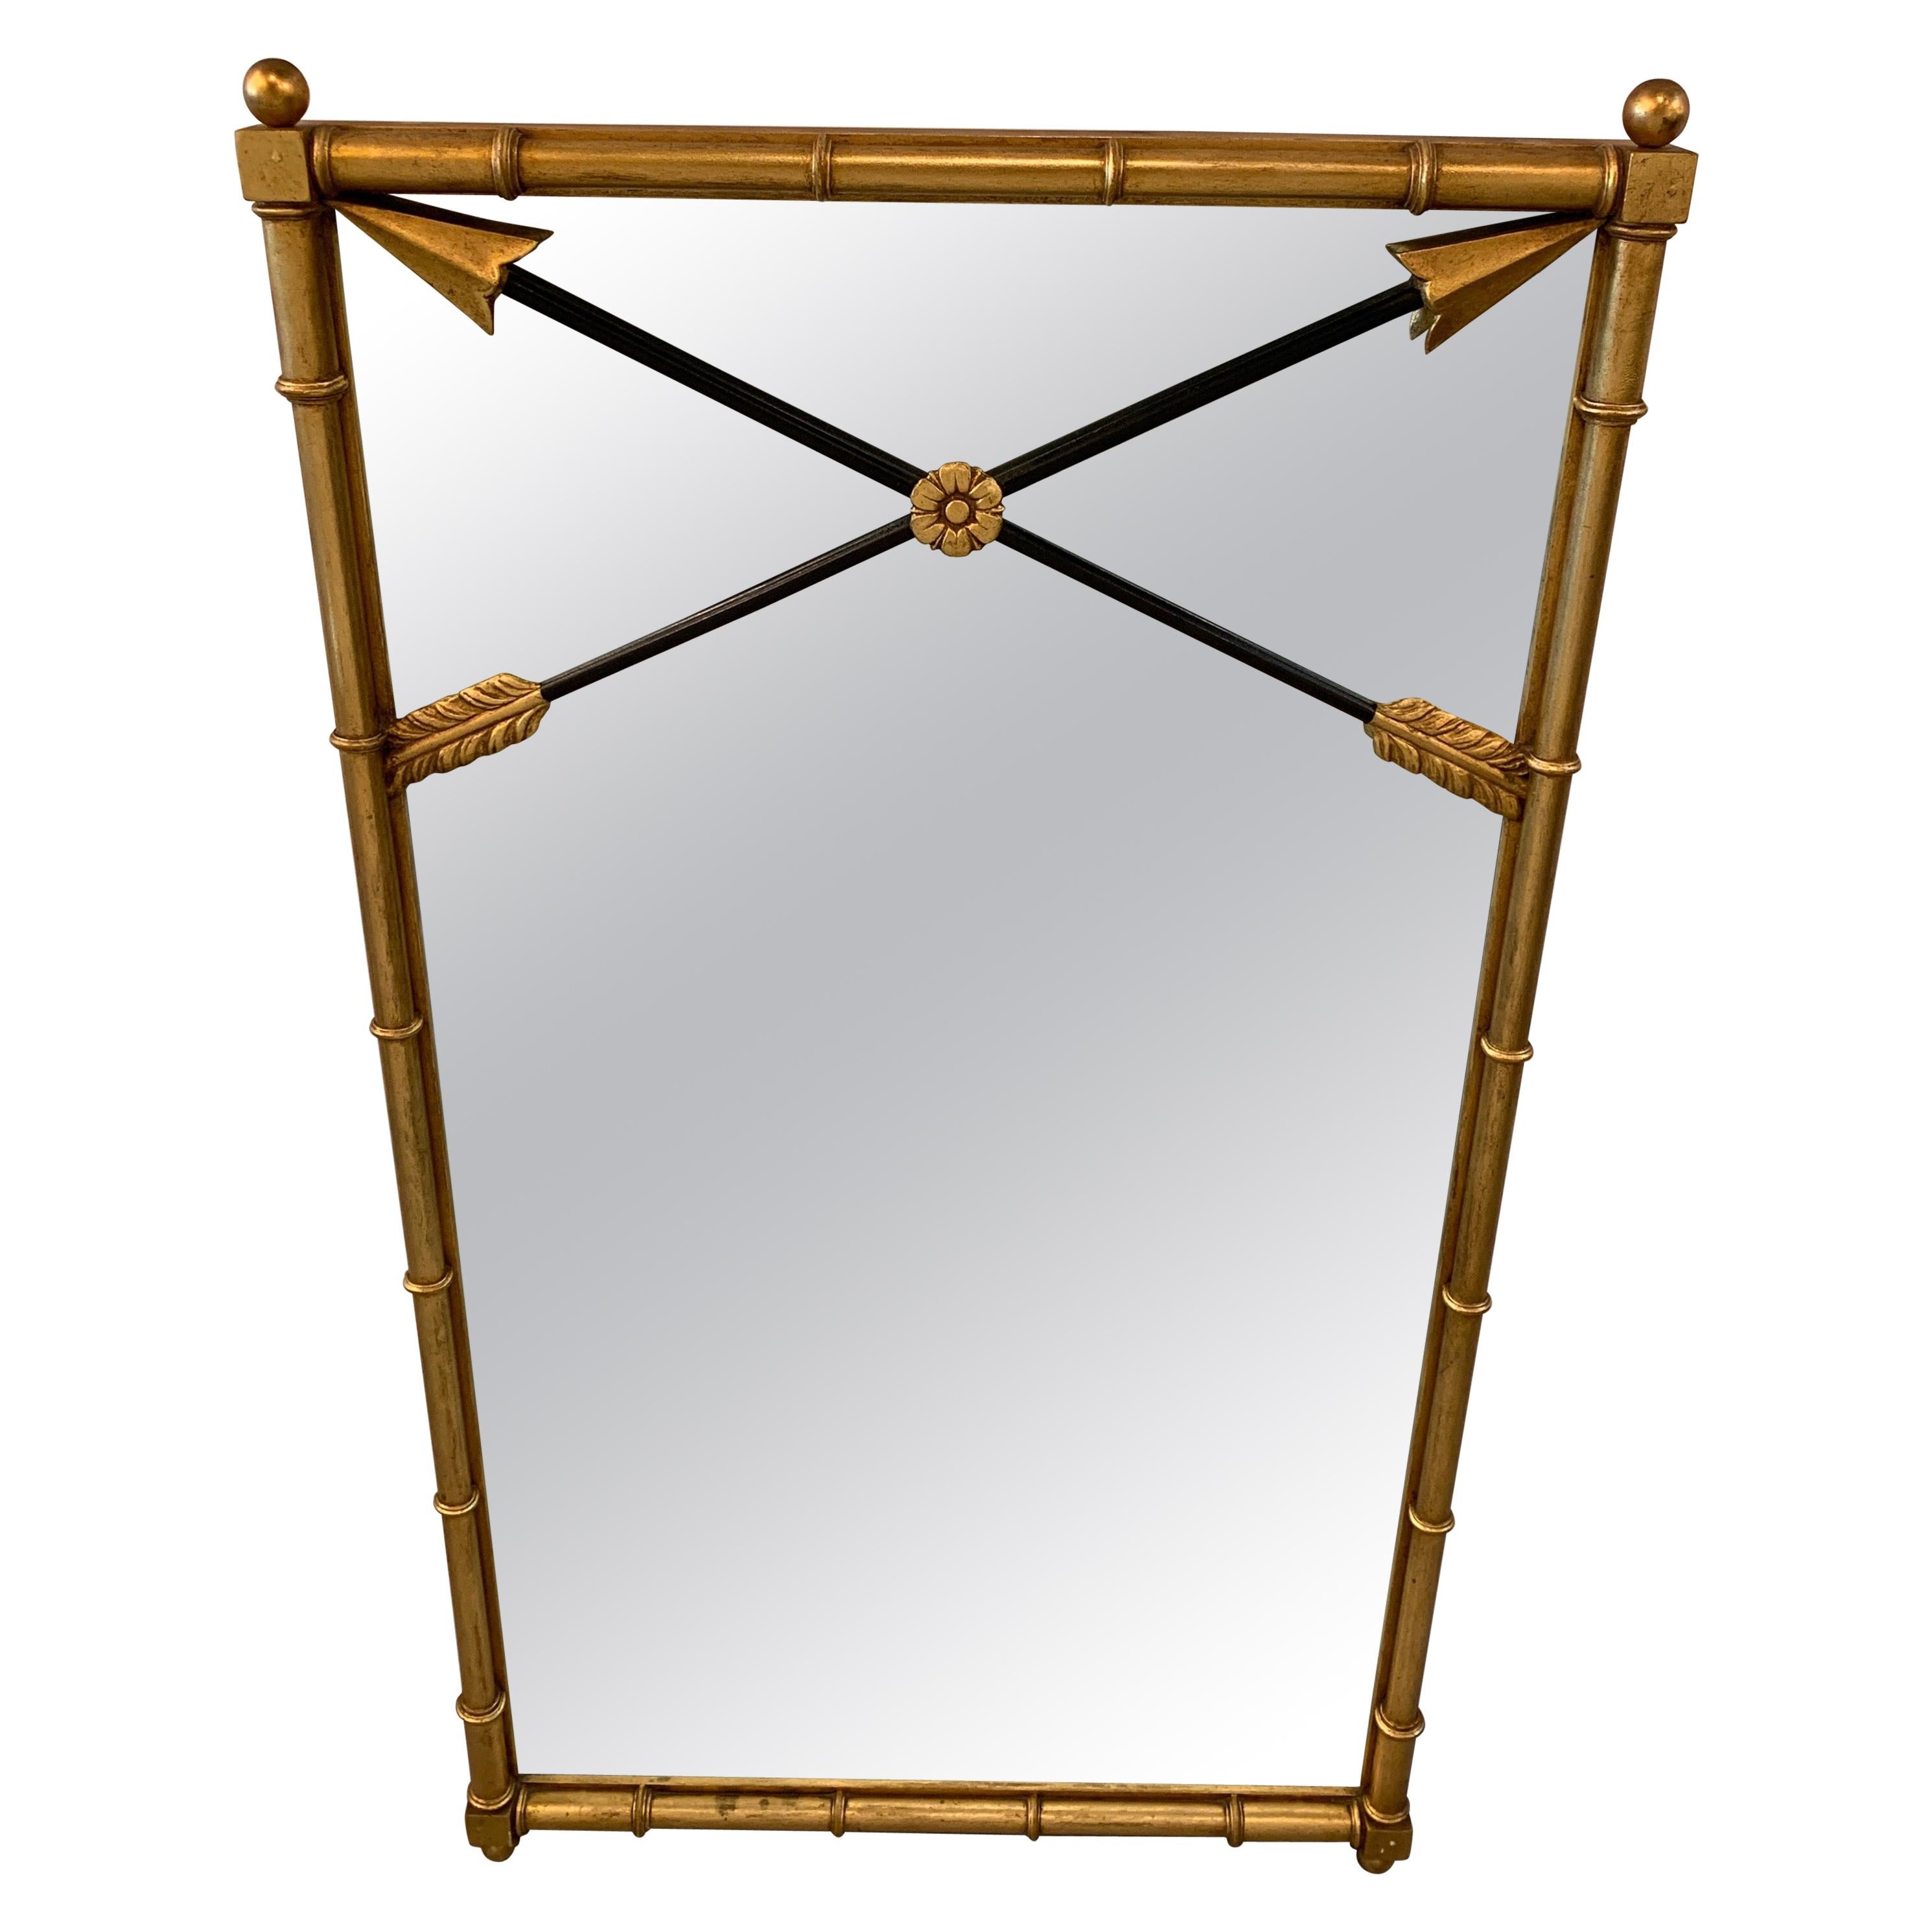 Giltwood Neoclassical Mirror